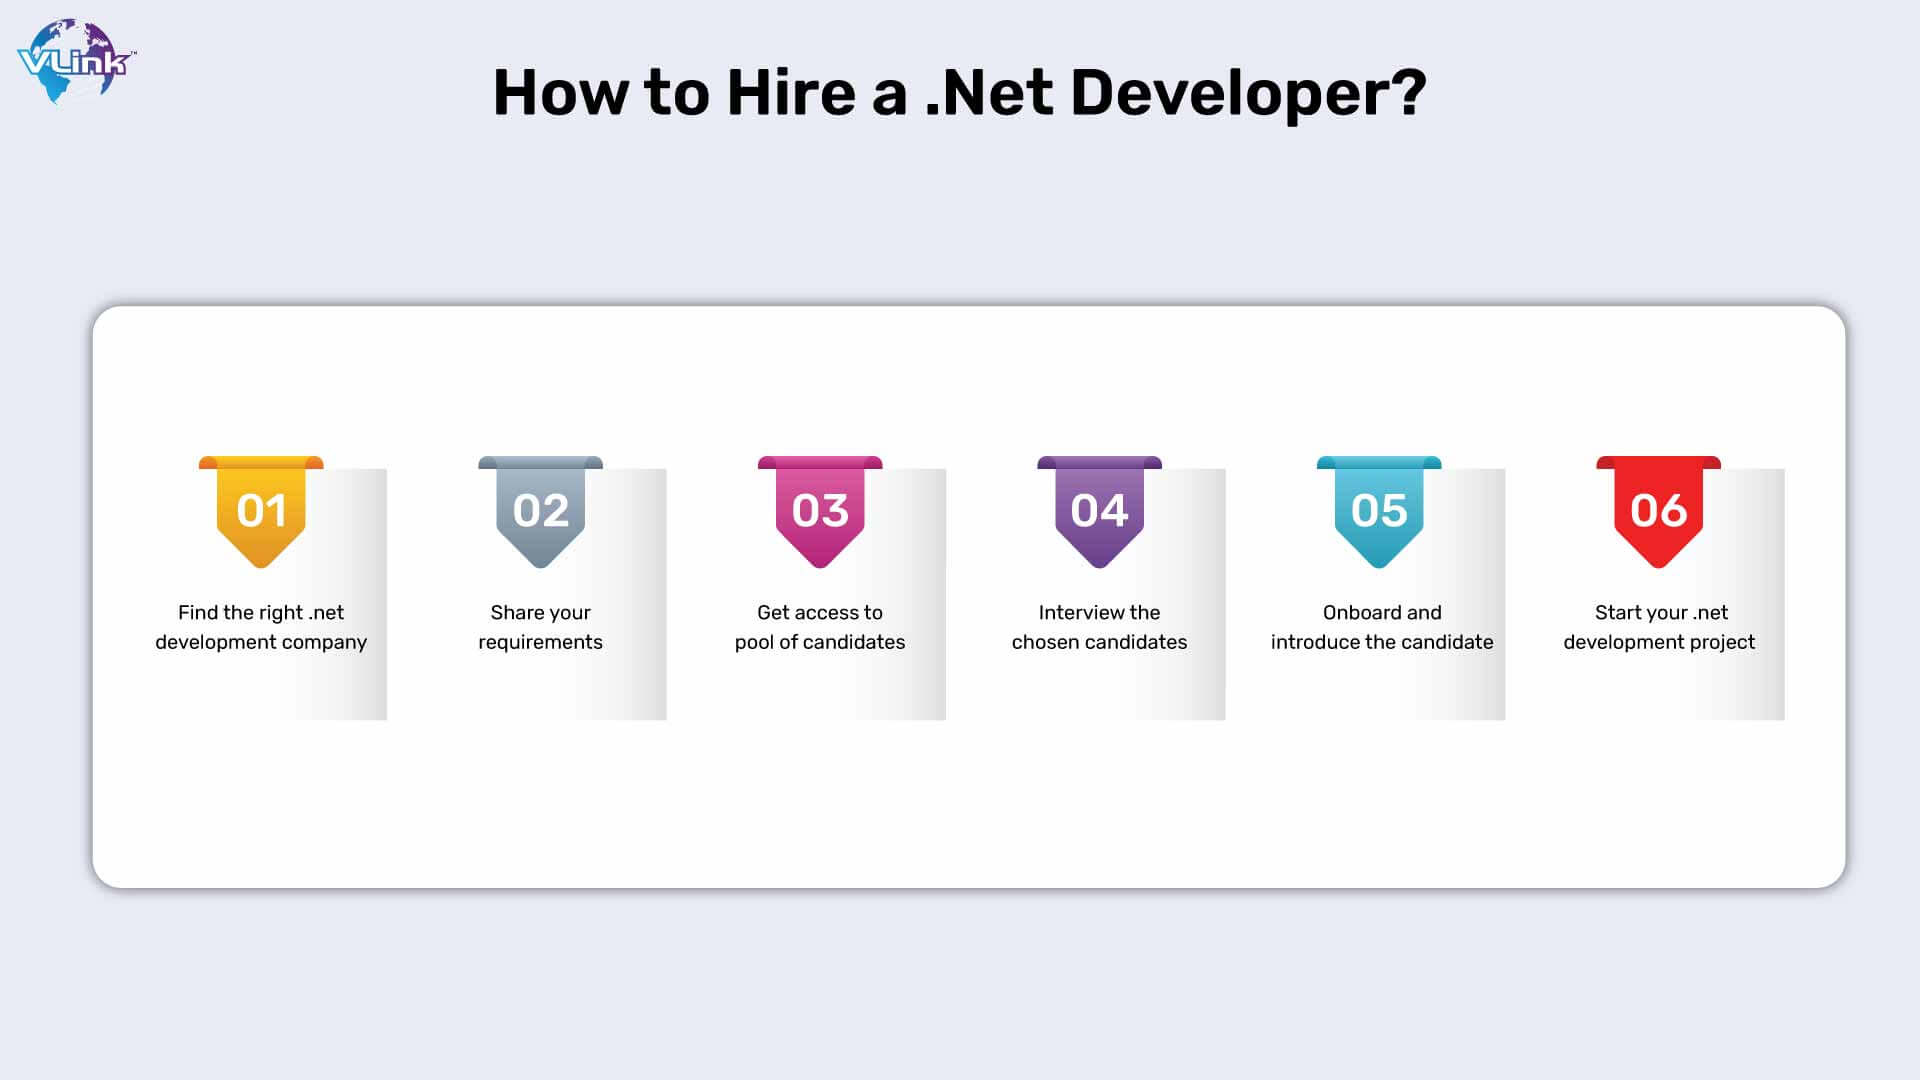 Hire the Skilled .Net Developer With VLink